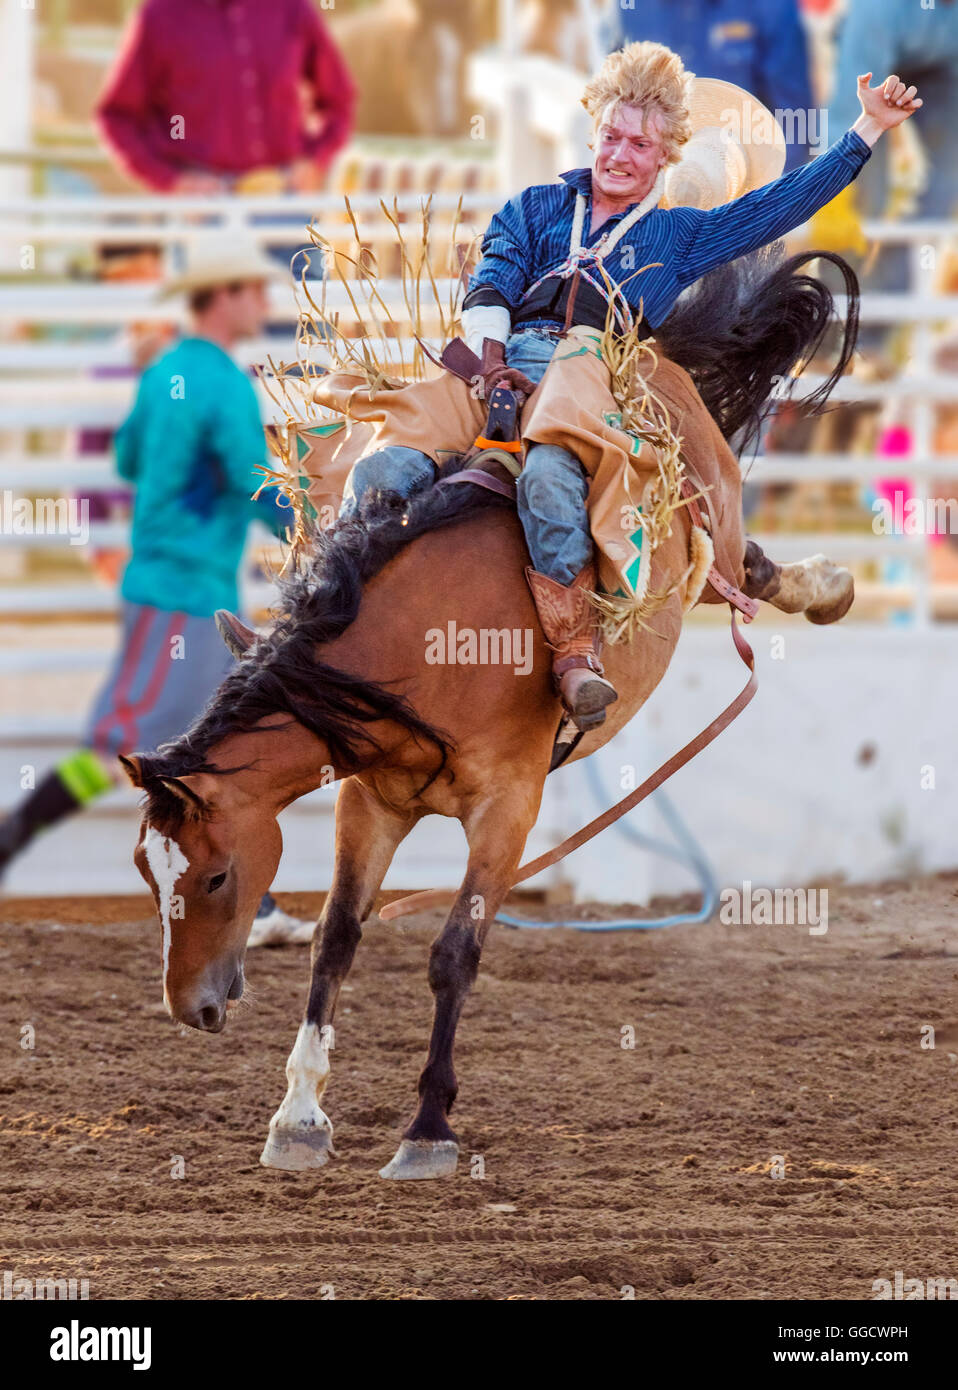 Rodeo cowboy riding a bucking horse, saddle bronc competition, Chaffee County Fair & Rodeo, Salida, Colorado, USA Stock Photo